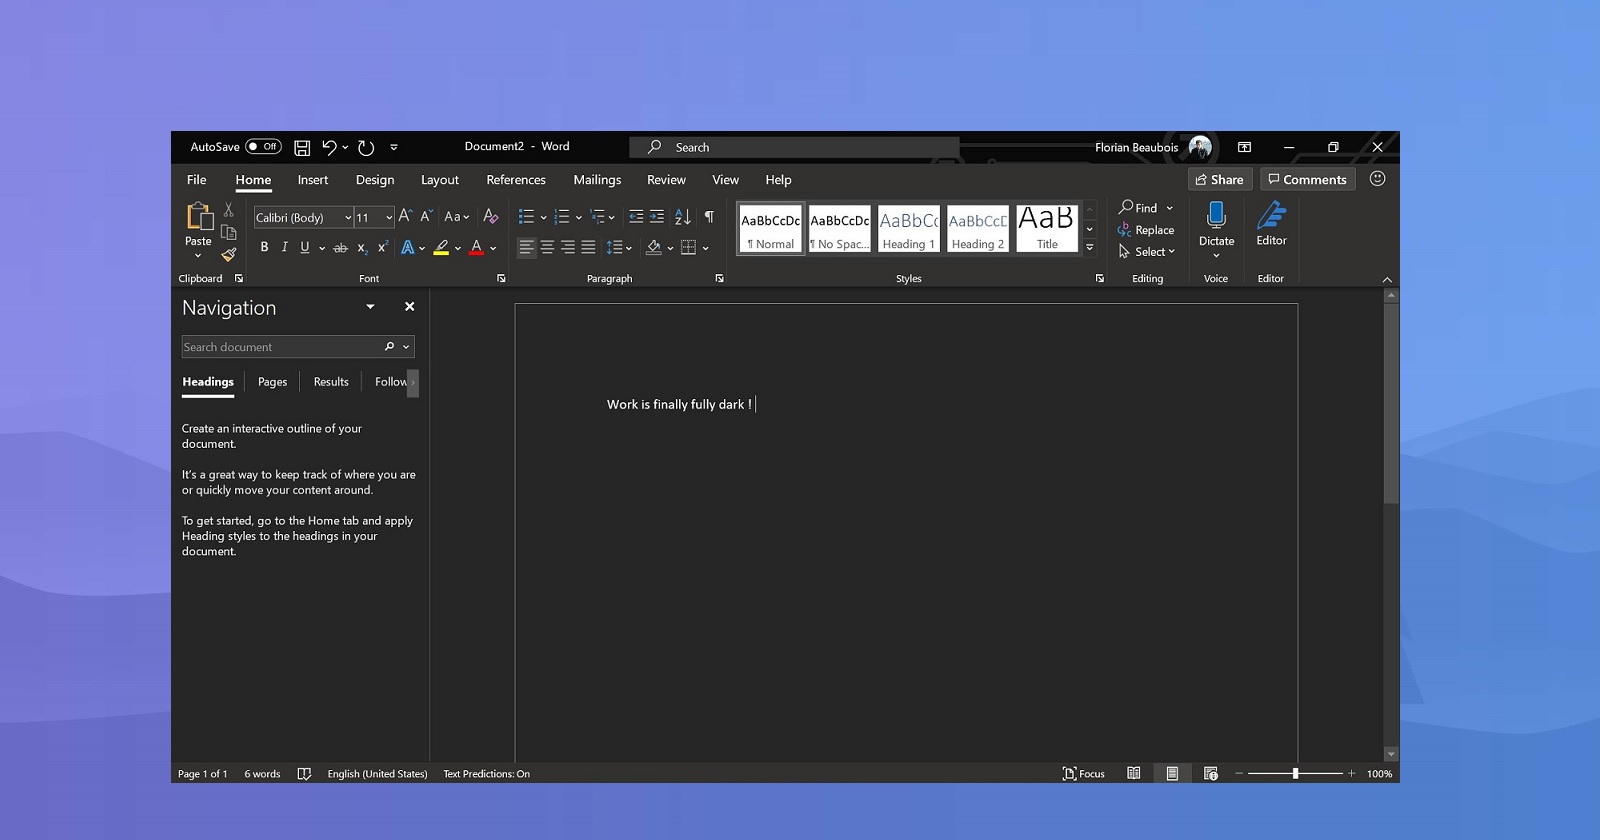 microsoft word for windows 10 free download